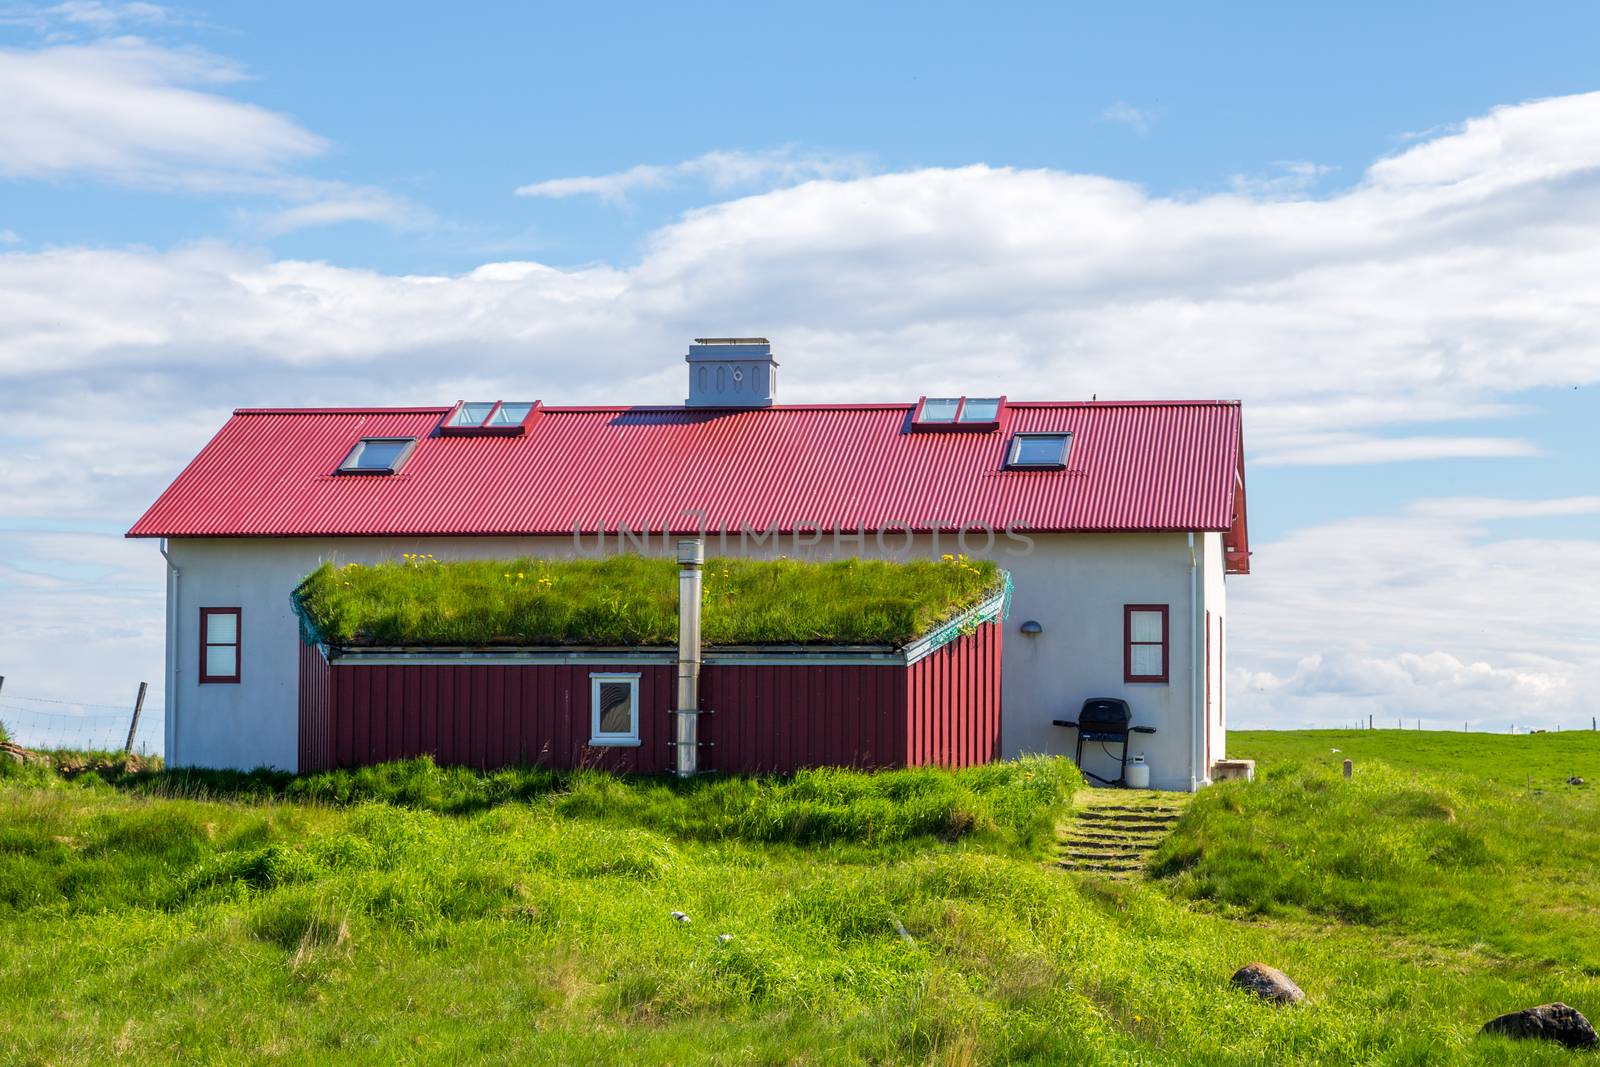 Icelandic eco house with grass on the roof, in the village on Flatey island, Iceland